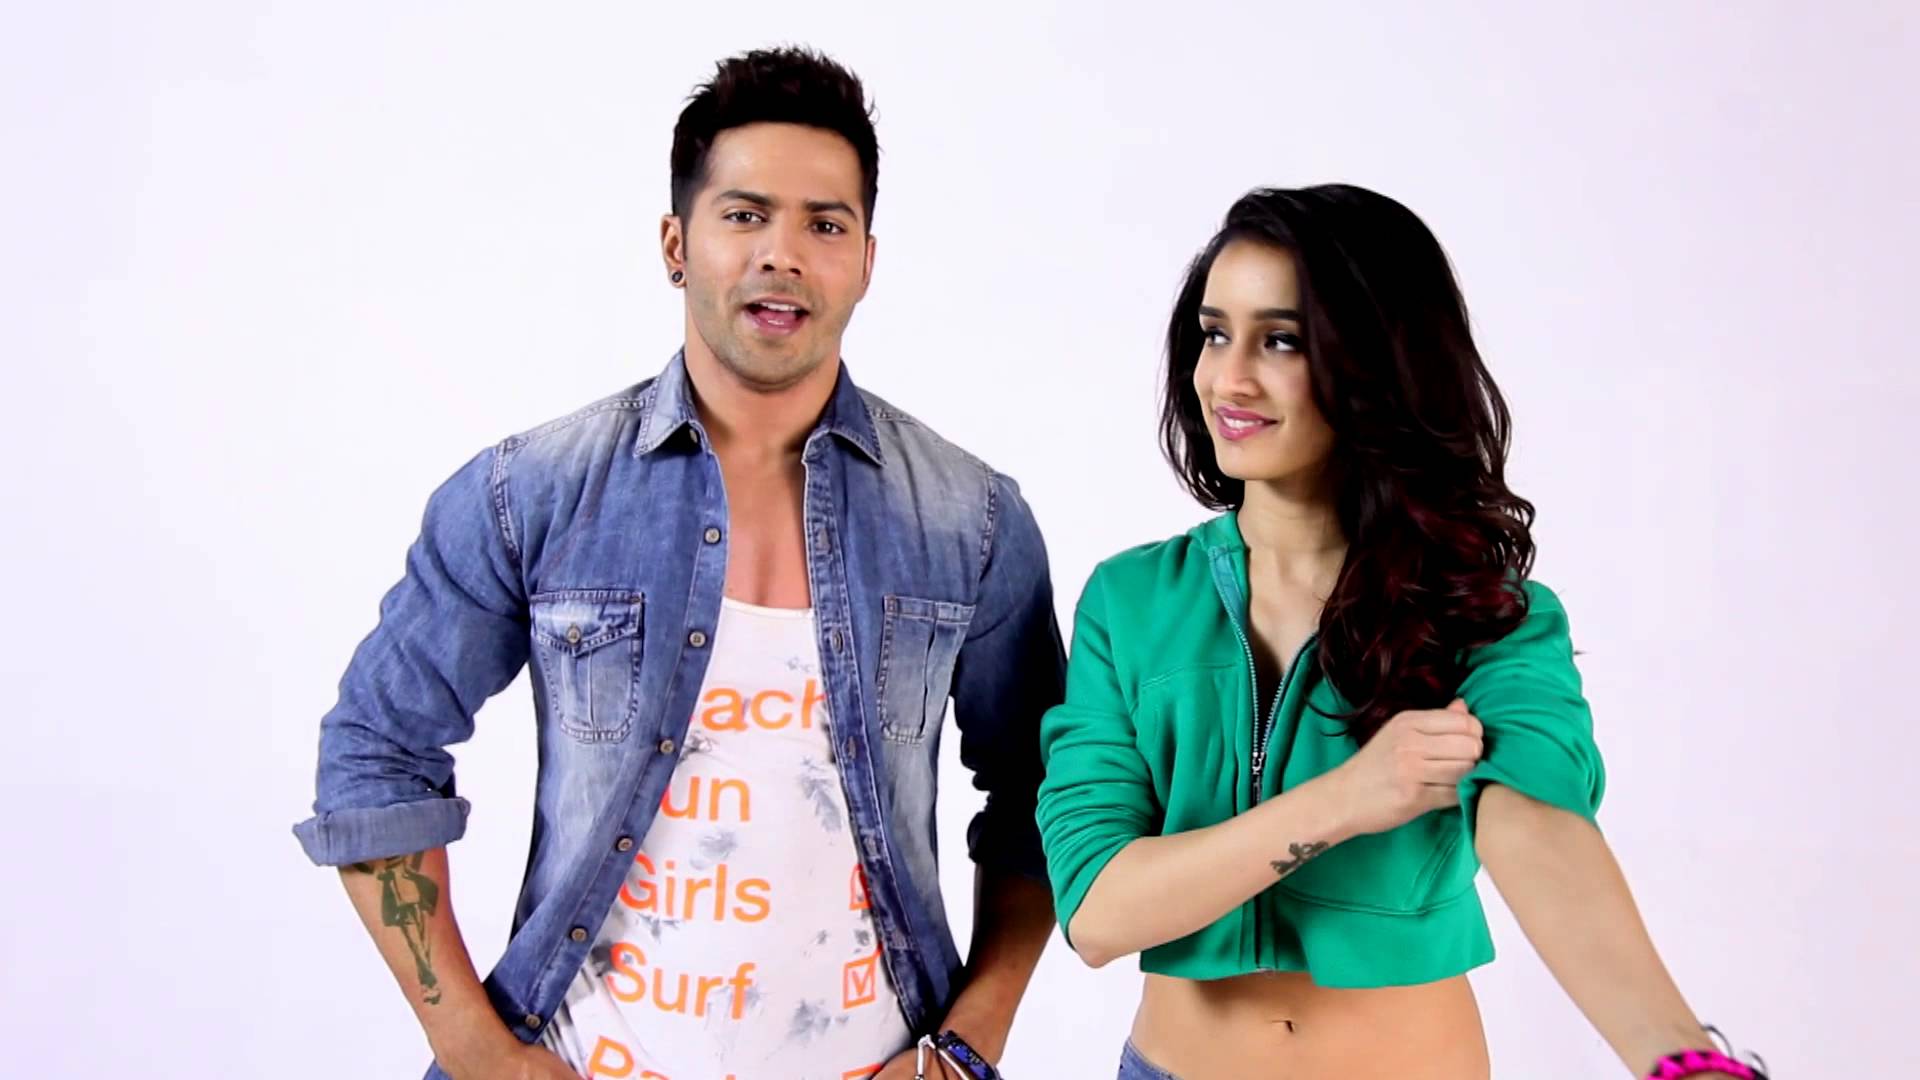 abcd full movie hd download 2015